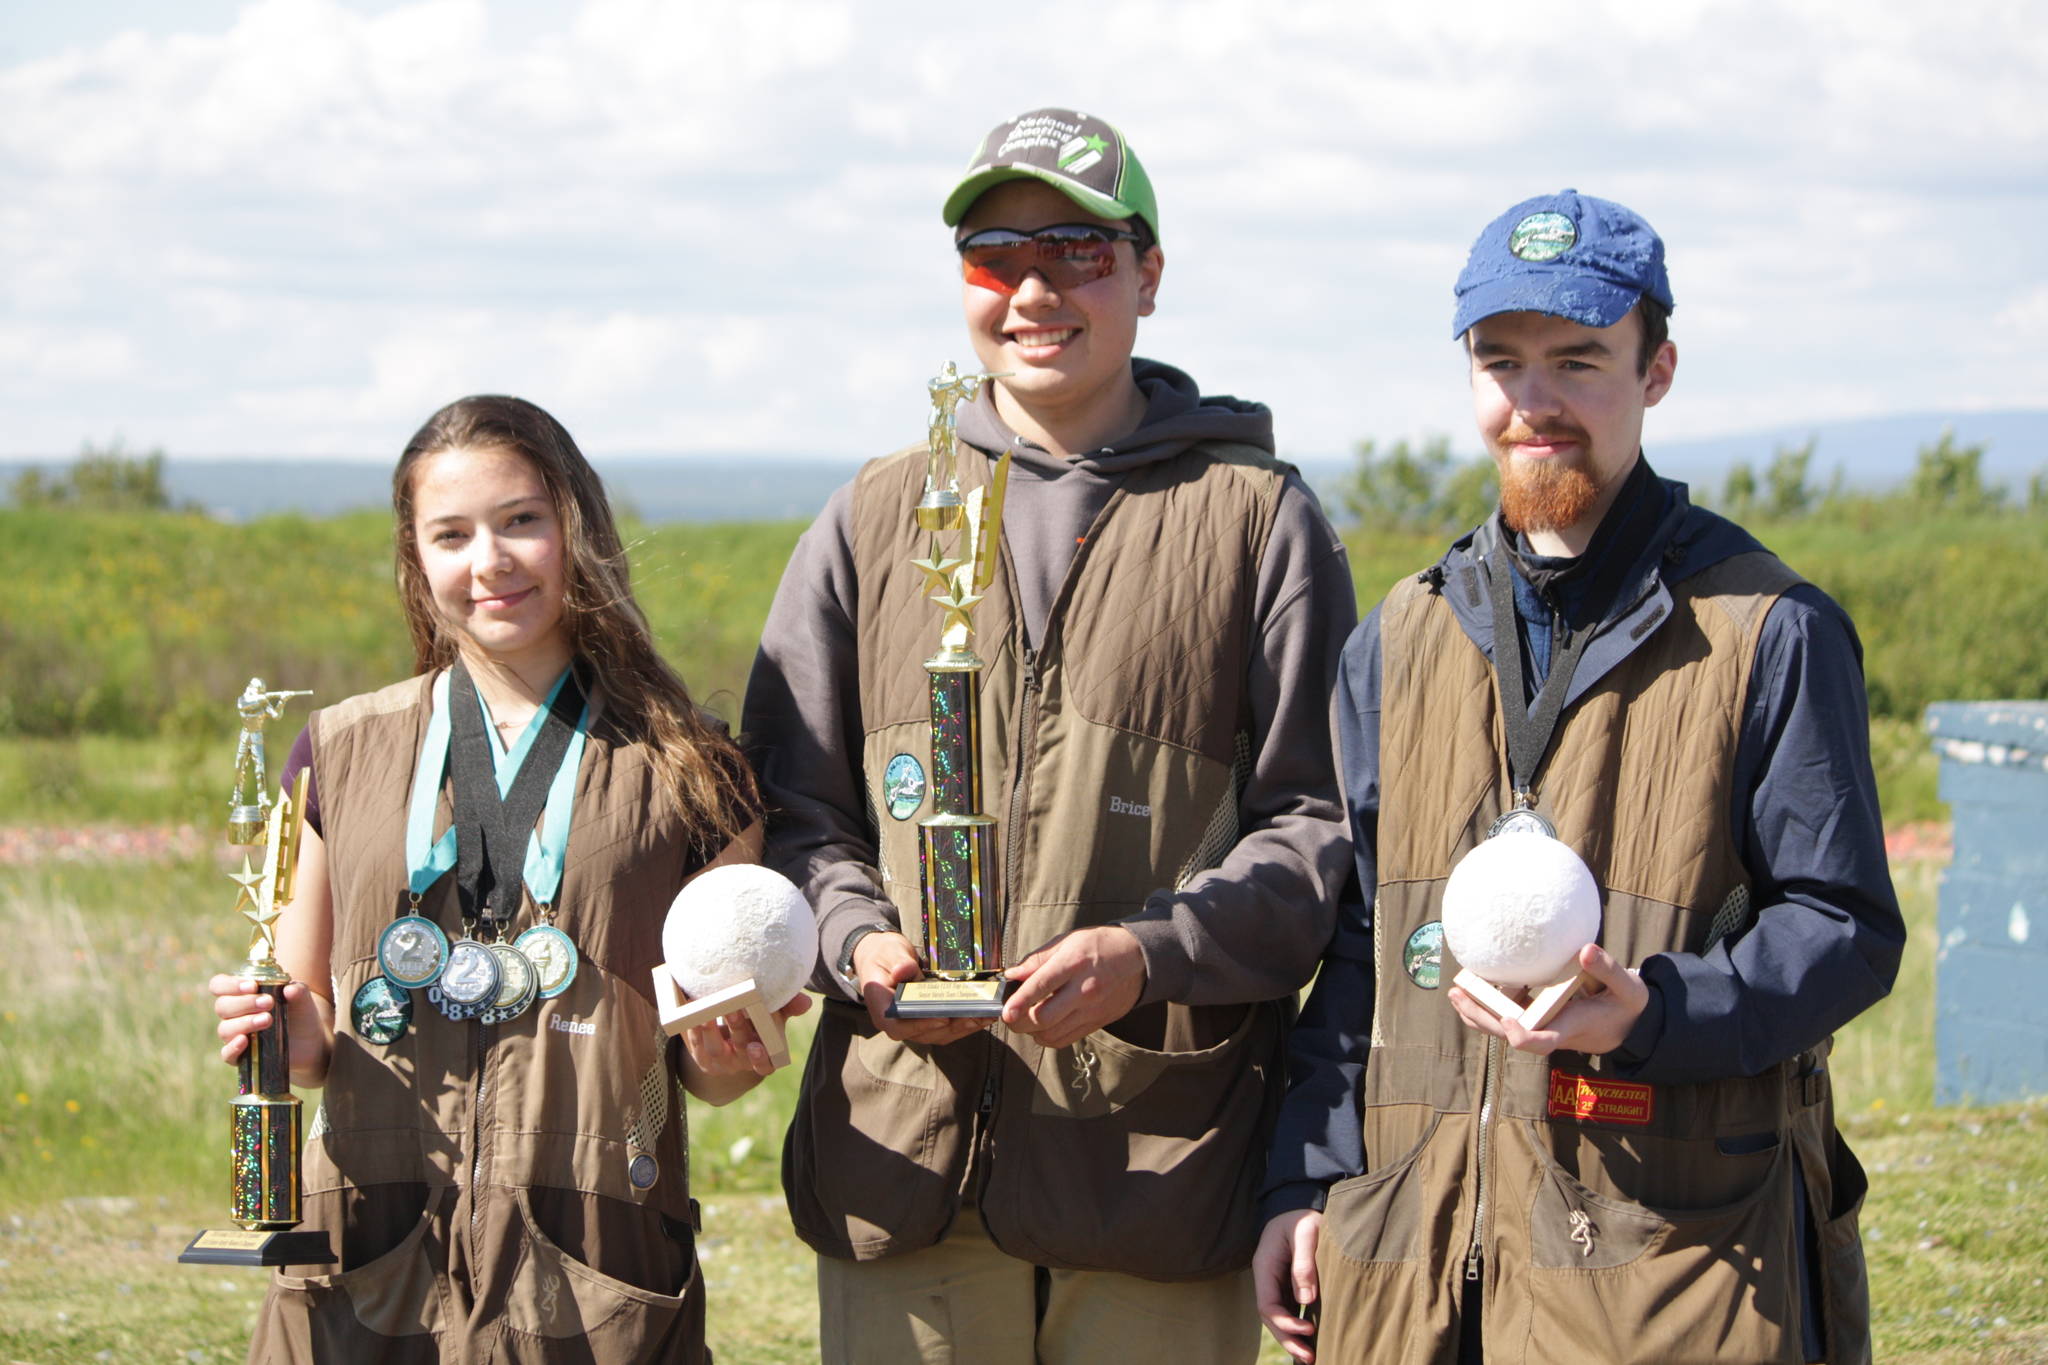 Renne Winn, Brice Norton, Garret Hermann pose with their trophies after placing first as a team in the HAA Trap Triumphant Competition at Birchwood Recreation and Shooting Park in Chugiak. (Courtesy Photo | Mark Kappler)